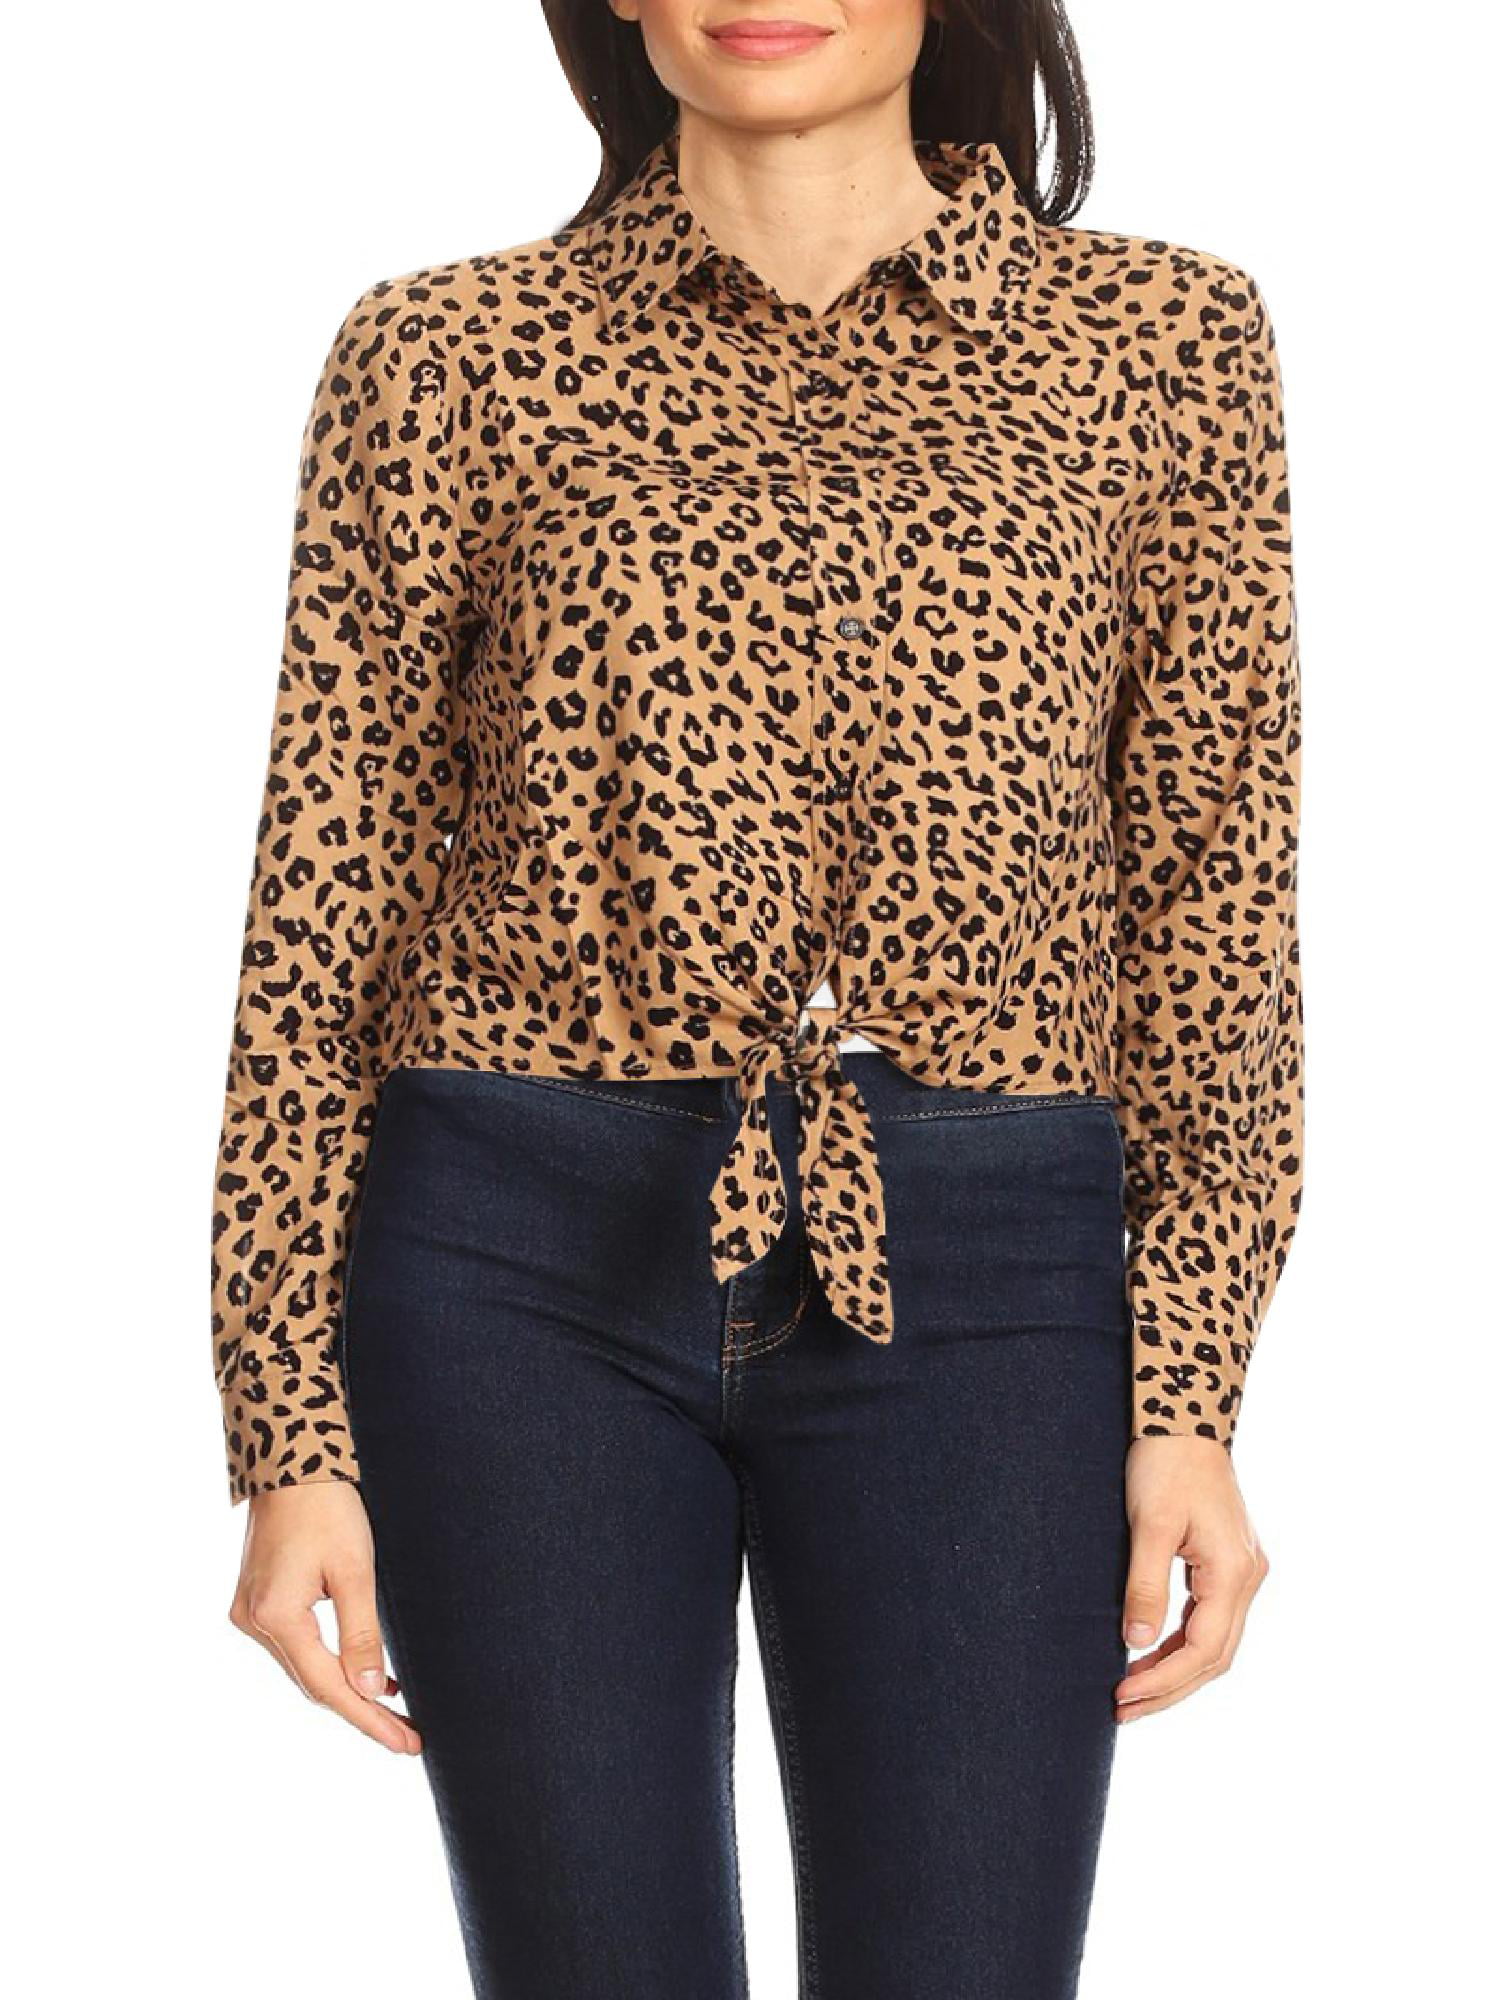 Womens Long Sleeve Buttons Shirt Ladies Leopard Printed Casual Party Blouse Tops 